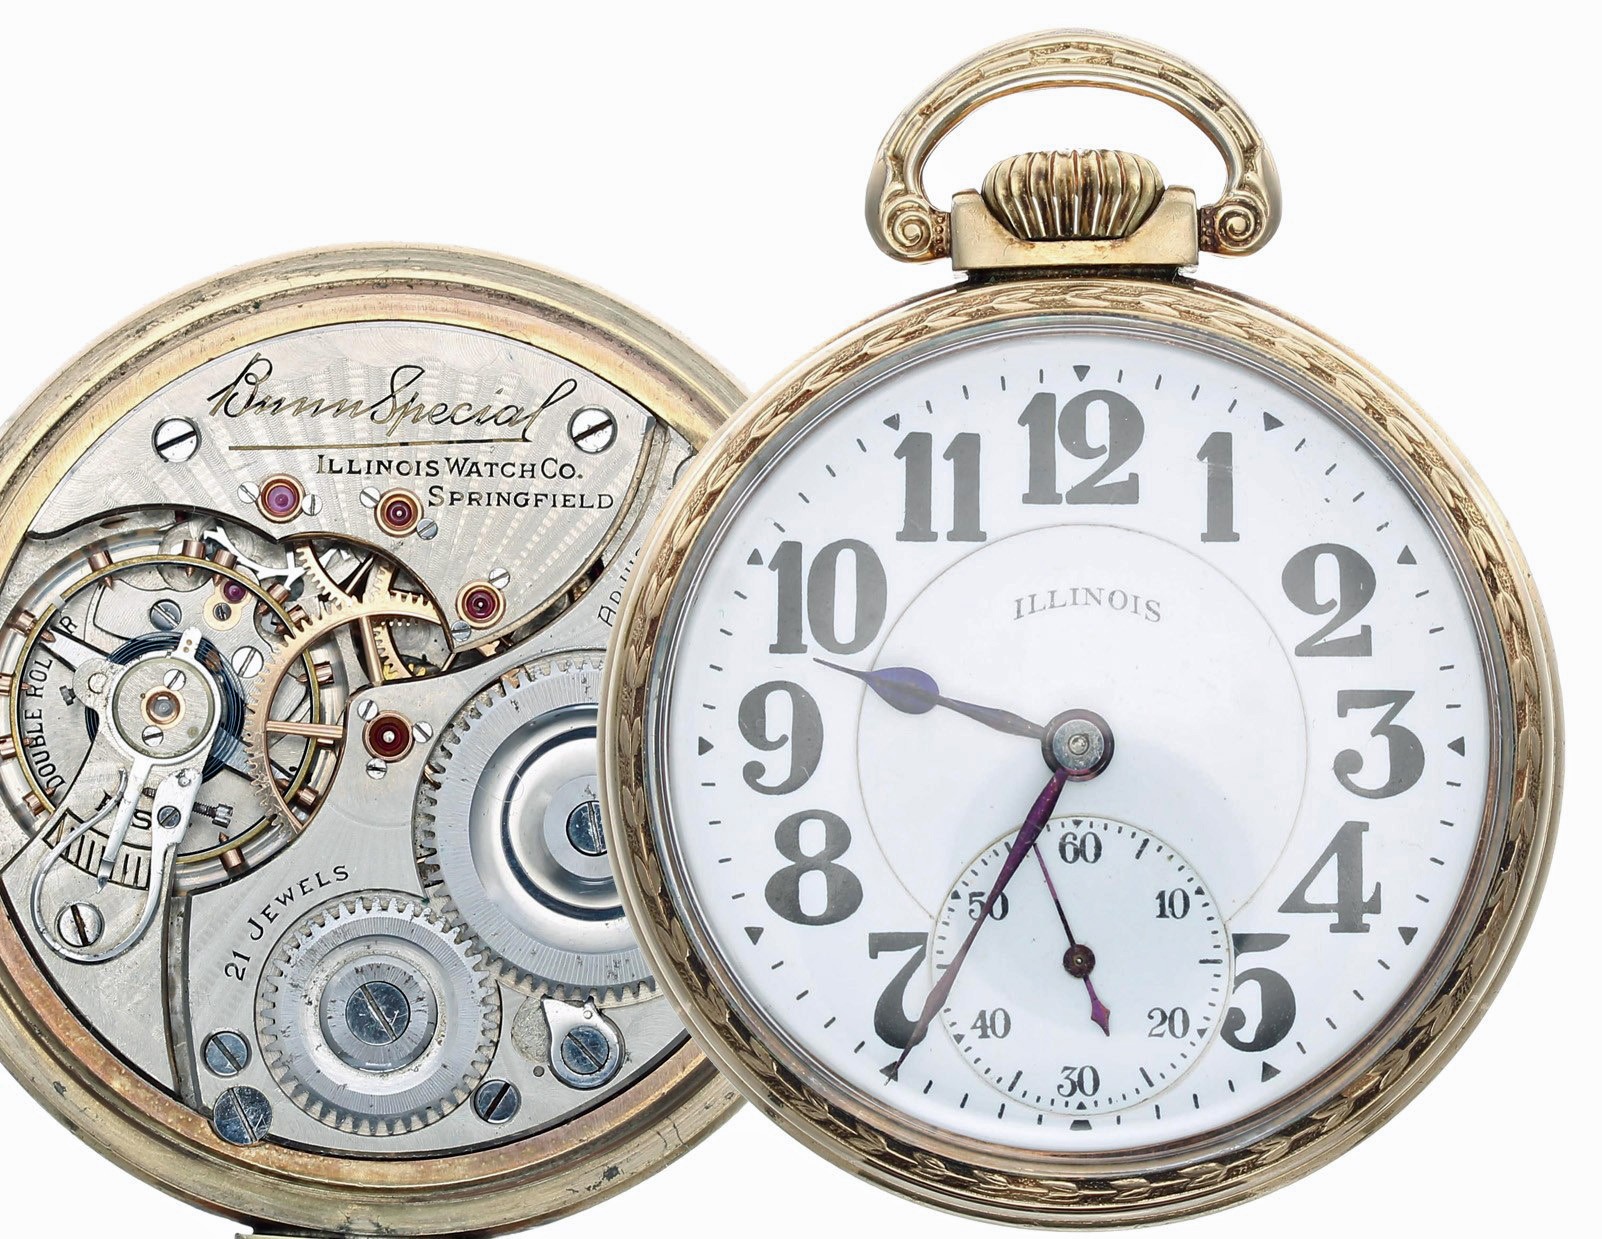 Illinois Watch Co. 'Bunn Special' 10k rolled gold lever set pocket watch, circa 1924, signed 21